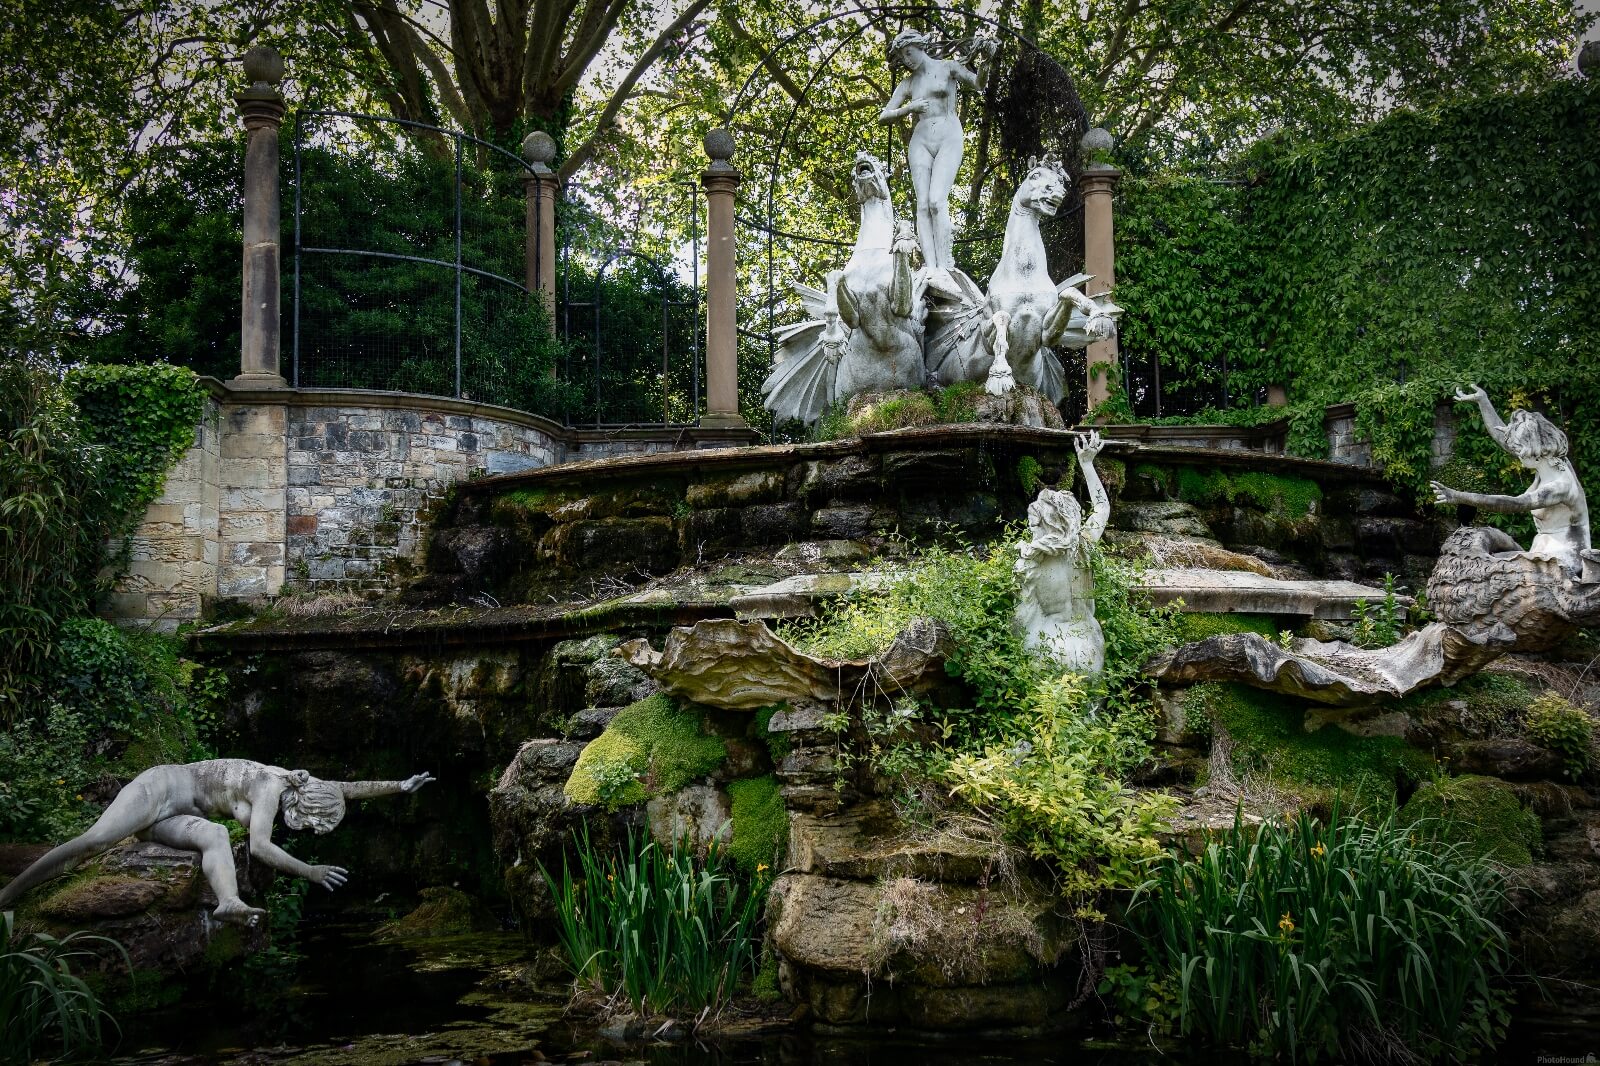 Image of The Naked Ladies, York House Gardens by Jules Renahan